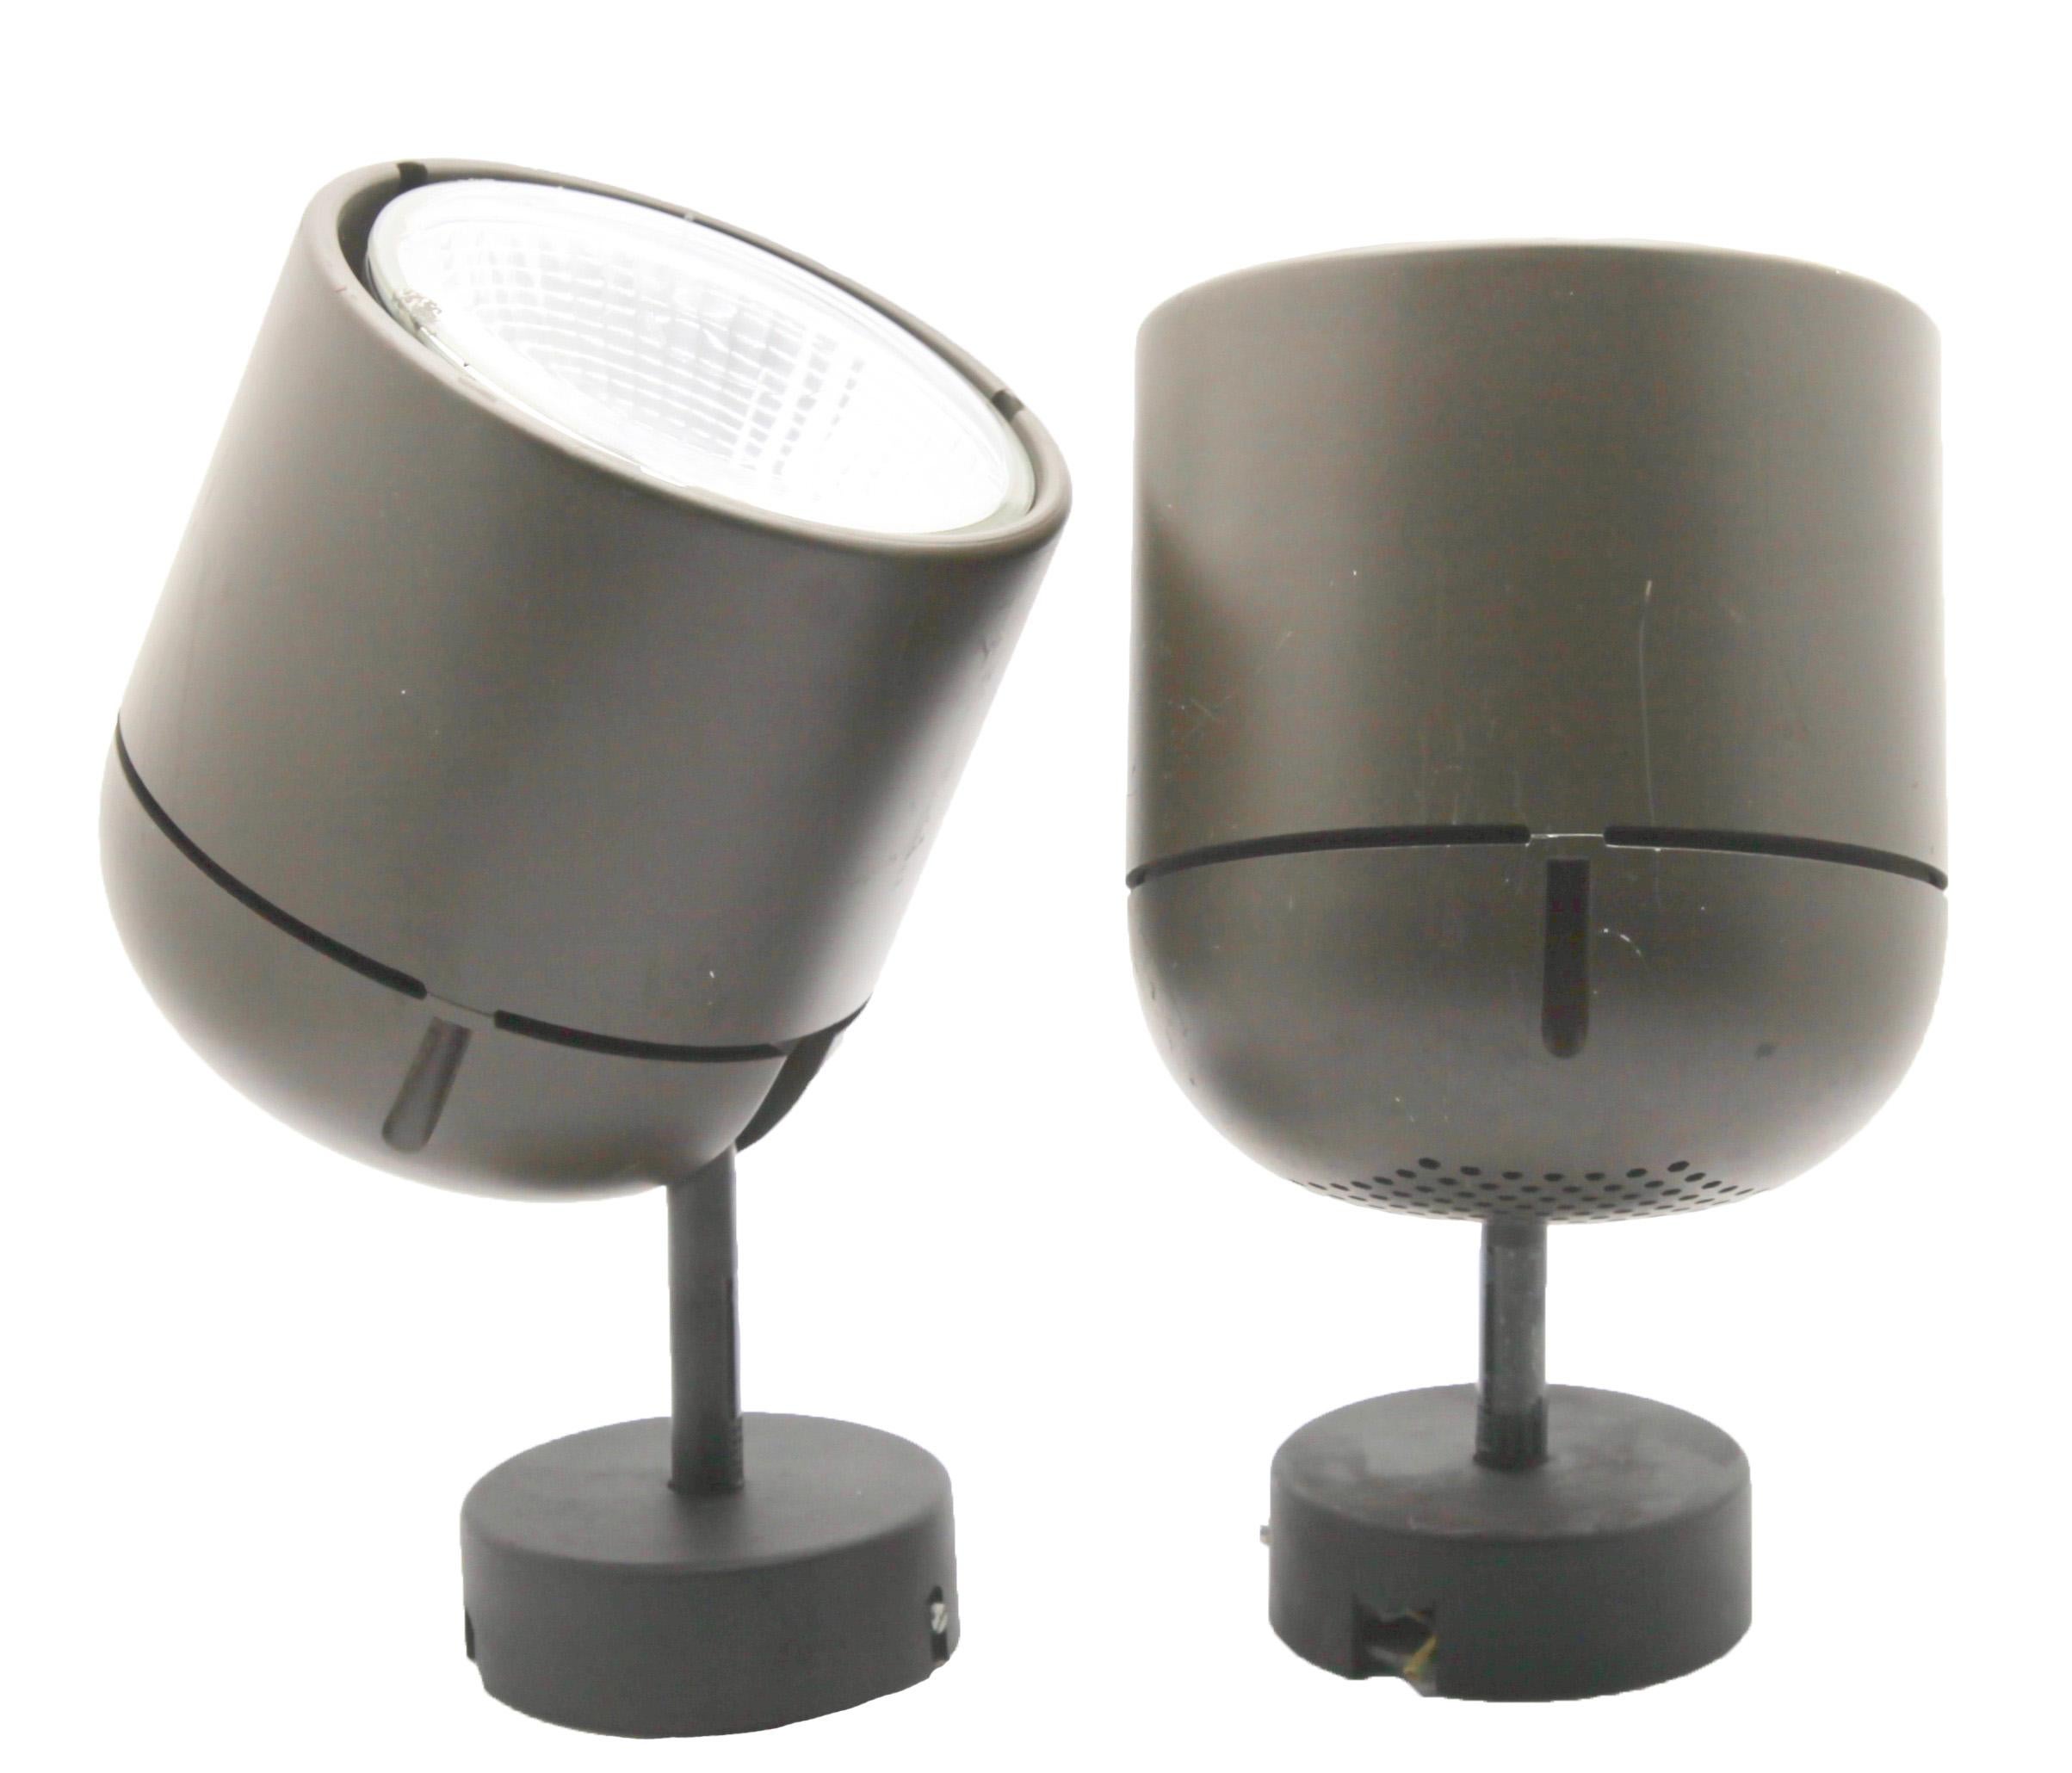 Pair of wall-mounted spotlights. By Motoko Ishii for Staff Leuchten.

Dimensions: Diameter of body 5.51 inches and the total length of 8.66
The bulb fitting E27 (see picture.)
Spot Silvania Hi-Spot 120 Halogen 100 Watt Floot 30 % (see